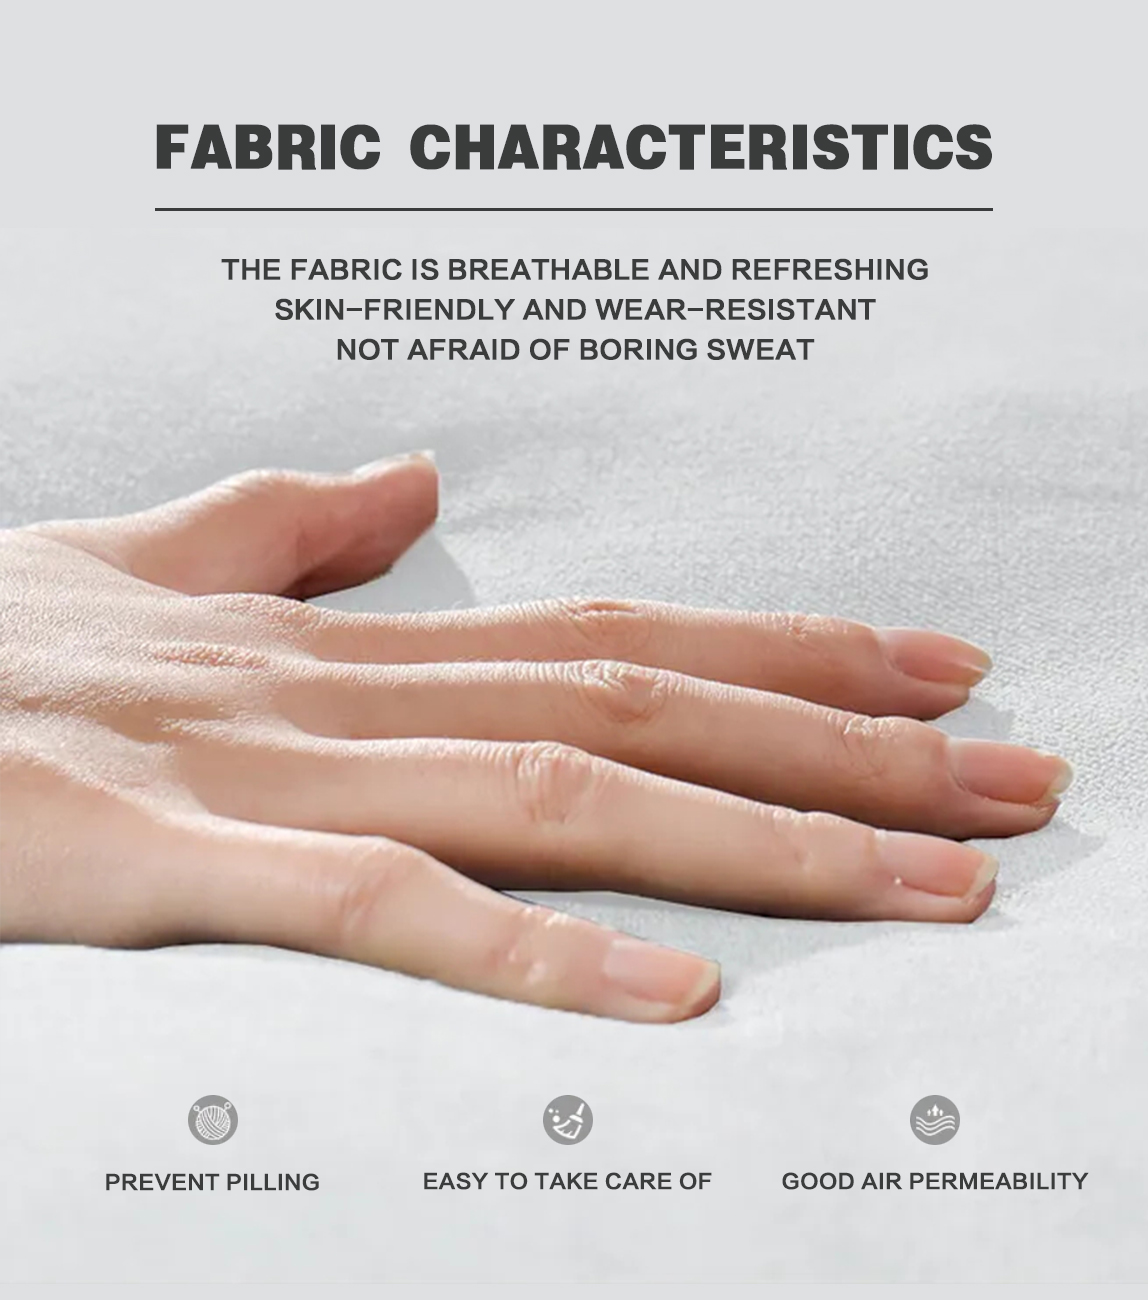 Features of this fabric